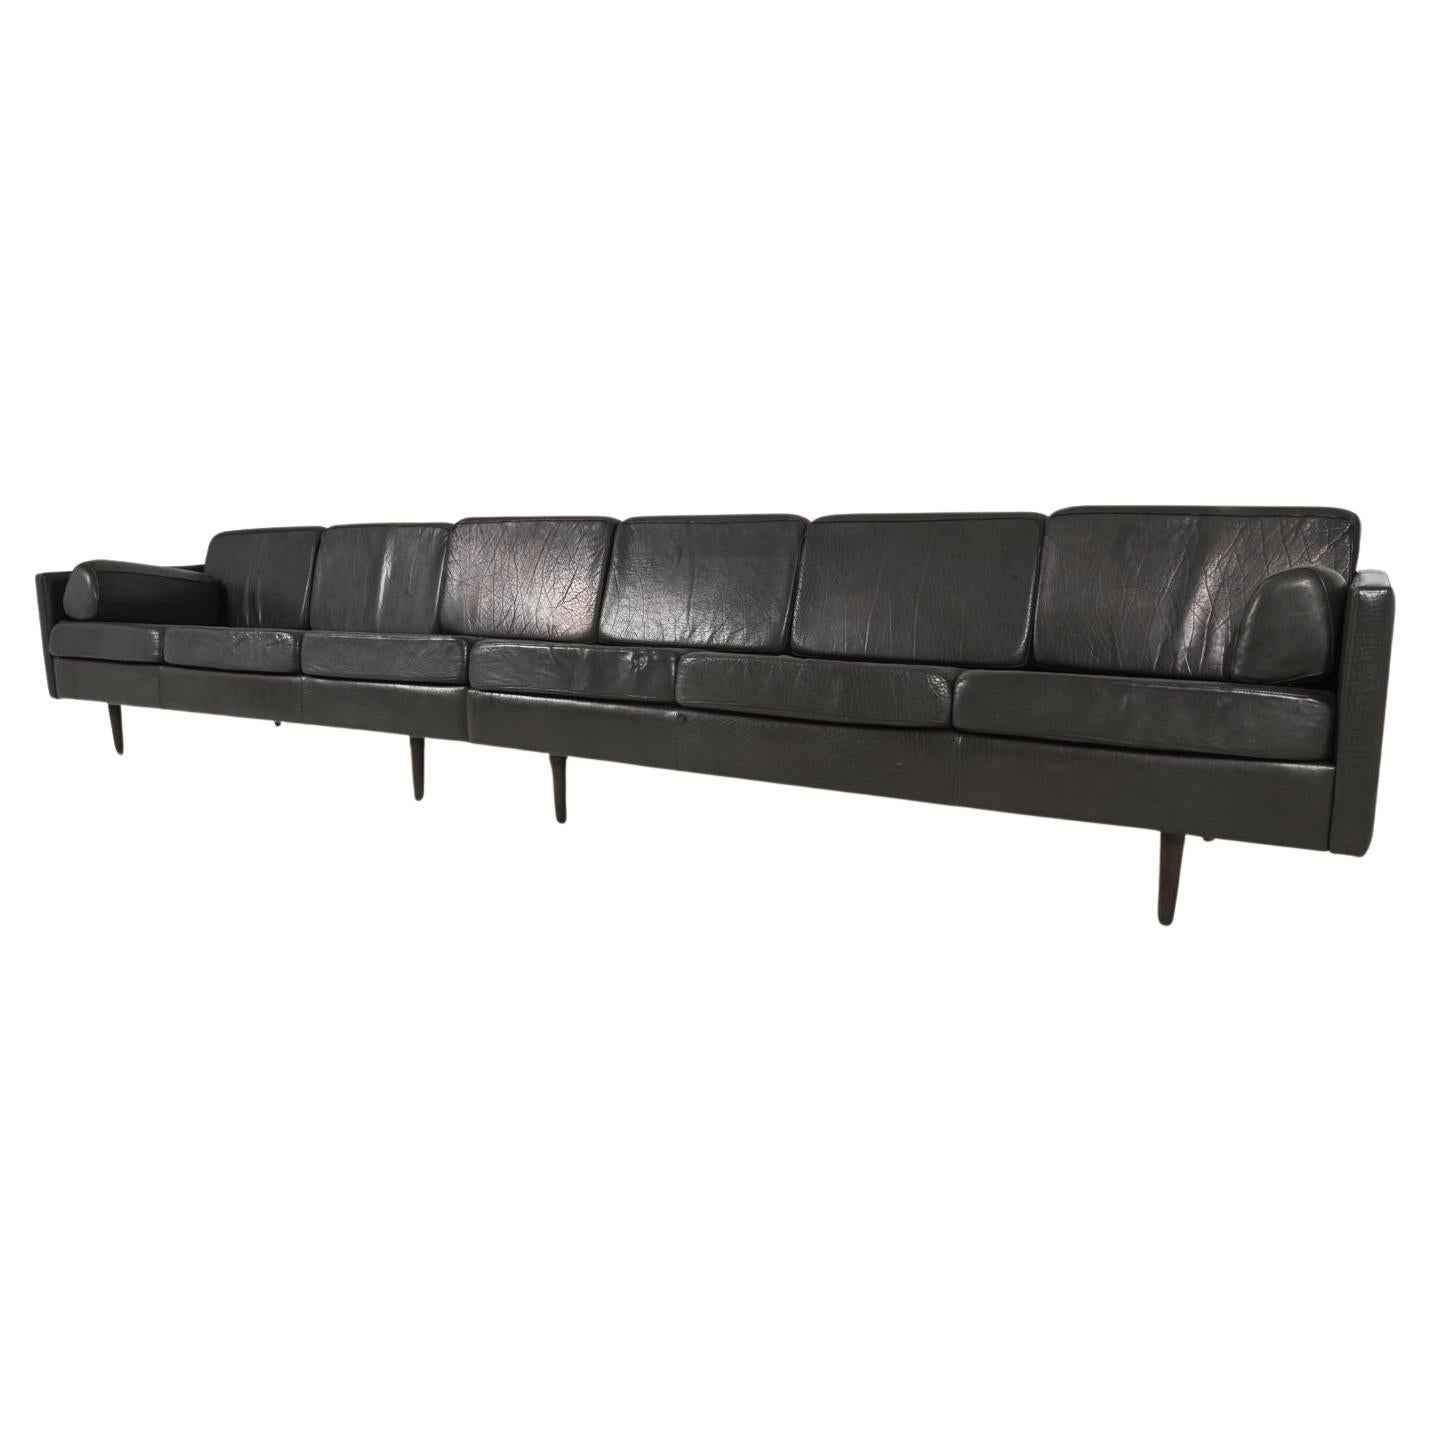 How many years should a leather sofa last?